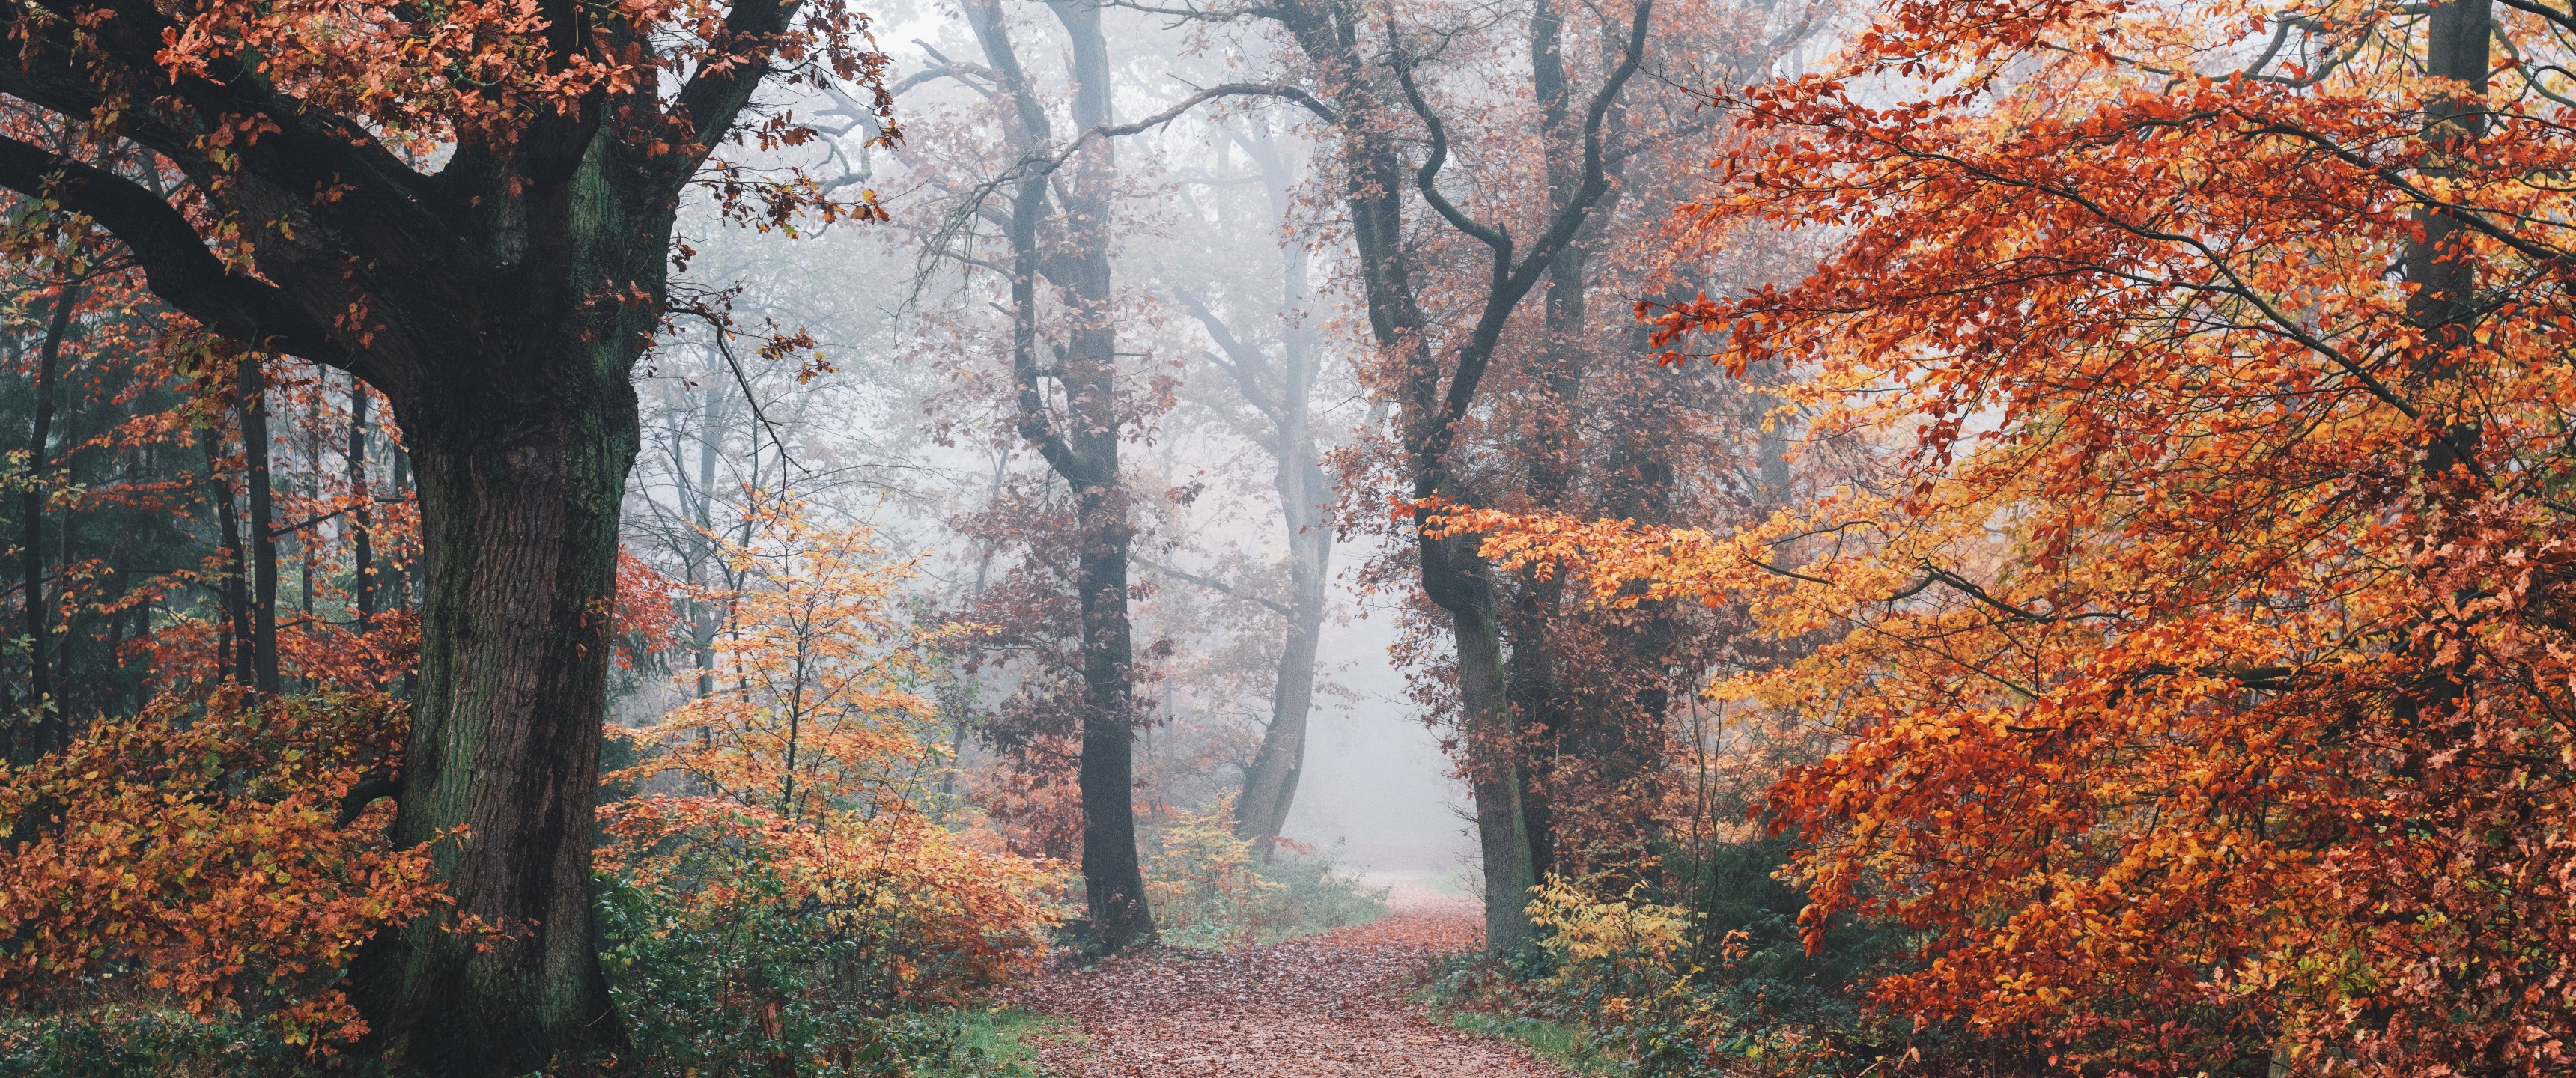 Autumn Wallpapers 4K, Forest, Fall Foliage, Trees, Foggy, Morning, 5K, Nature,